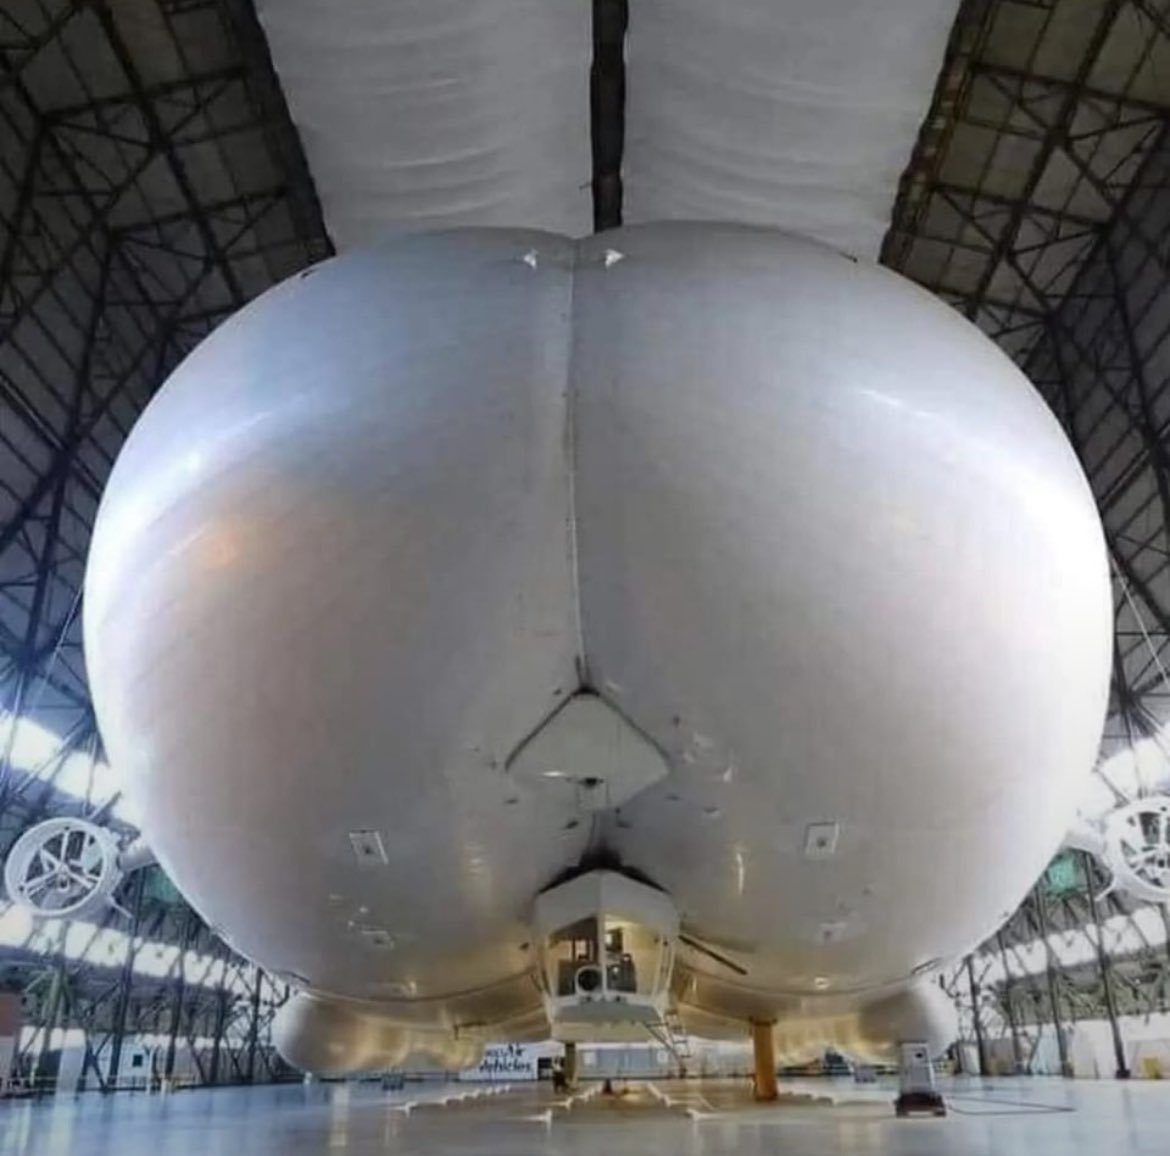 This is Airlander 10, a massive helium inflated hybrid vehicle sitting inside its hangar in London 🍑🇬🇧